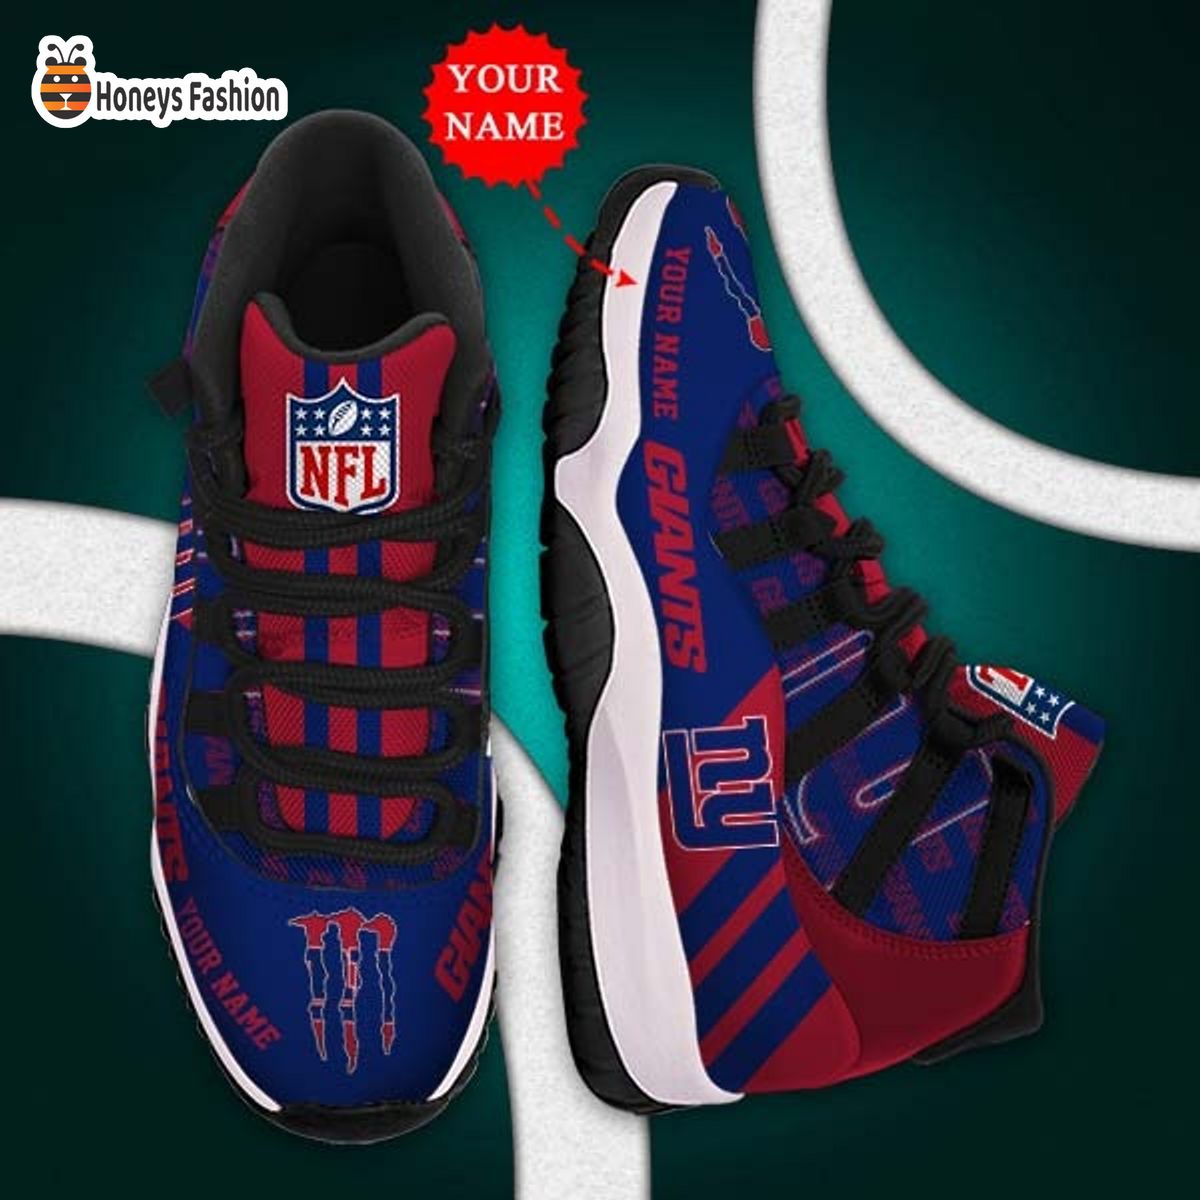 New York Giants NFL Adidas Personalized Air Jordan 11 Shoes